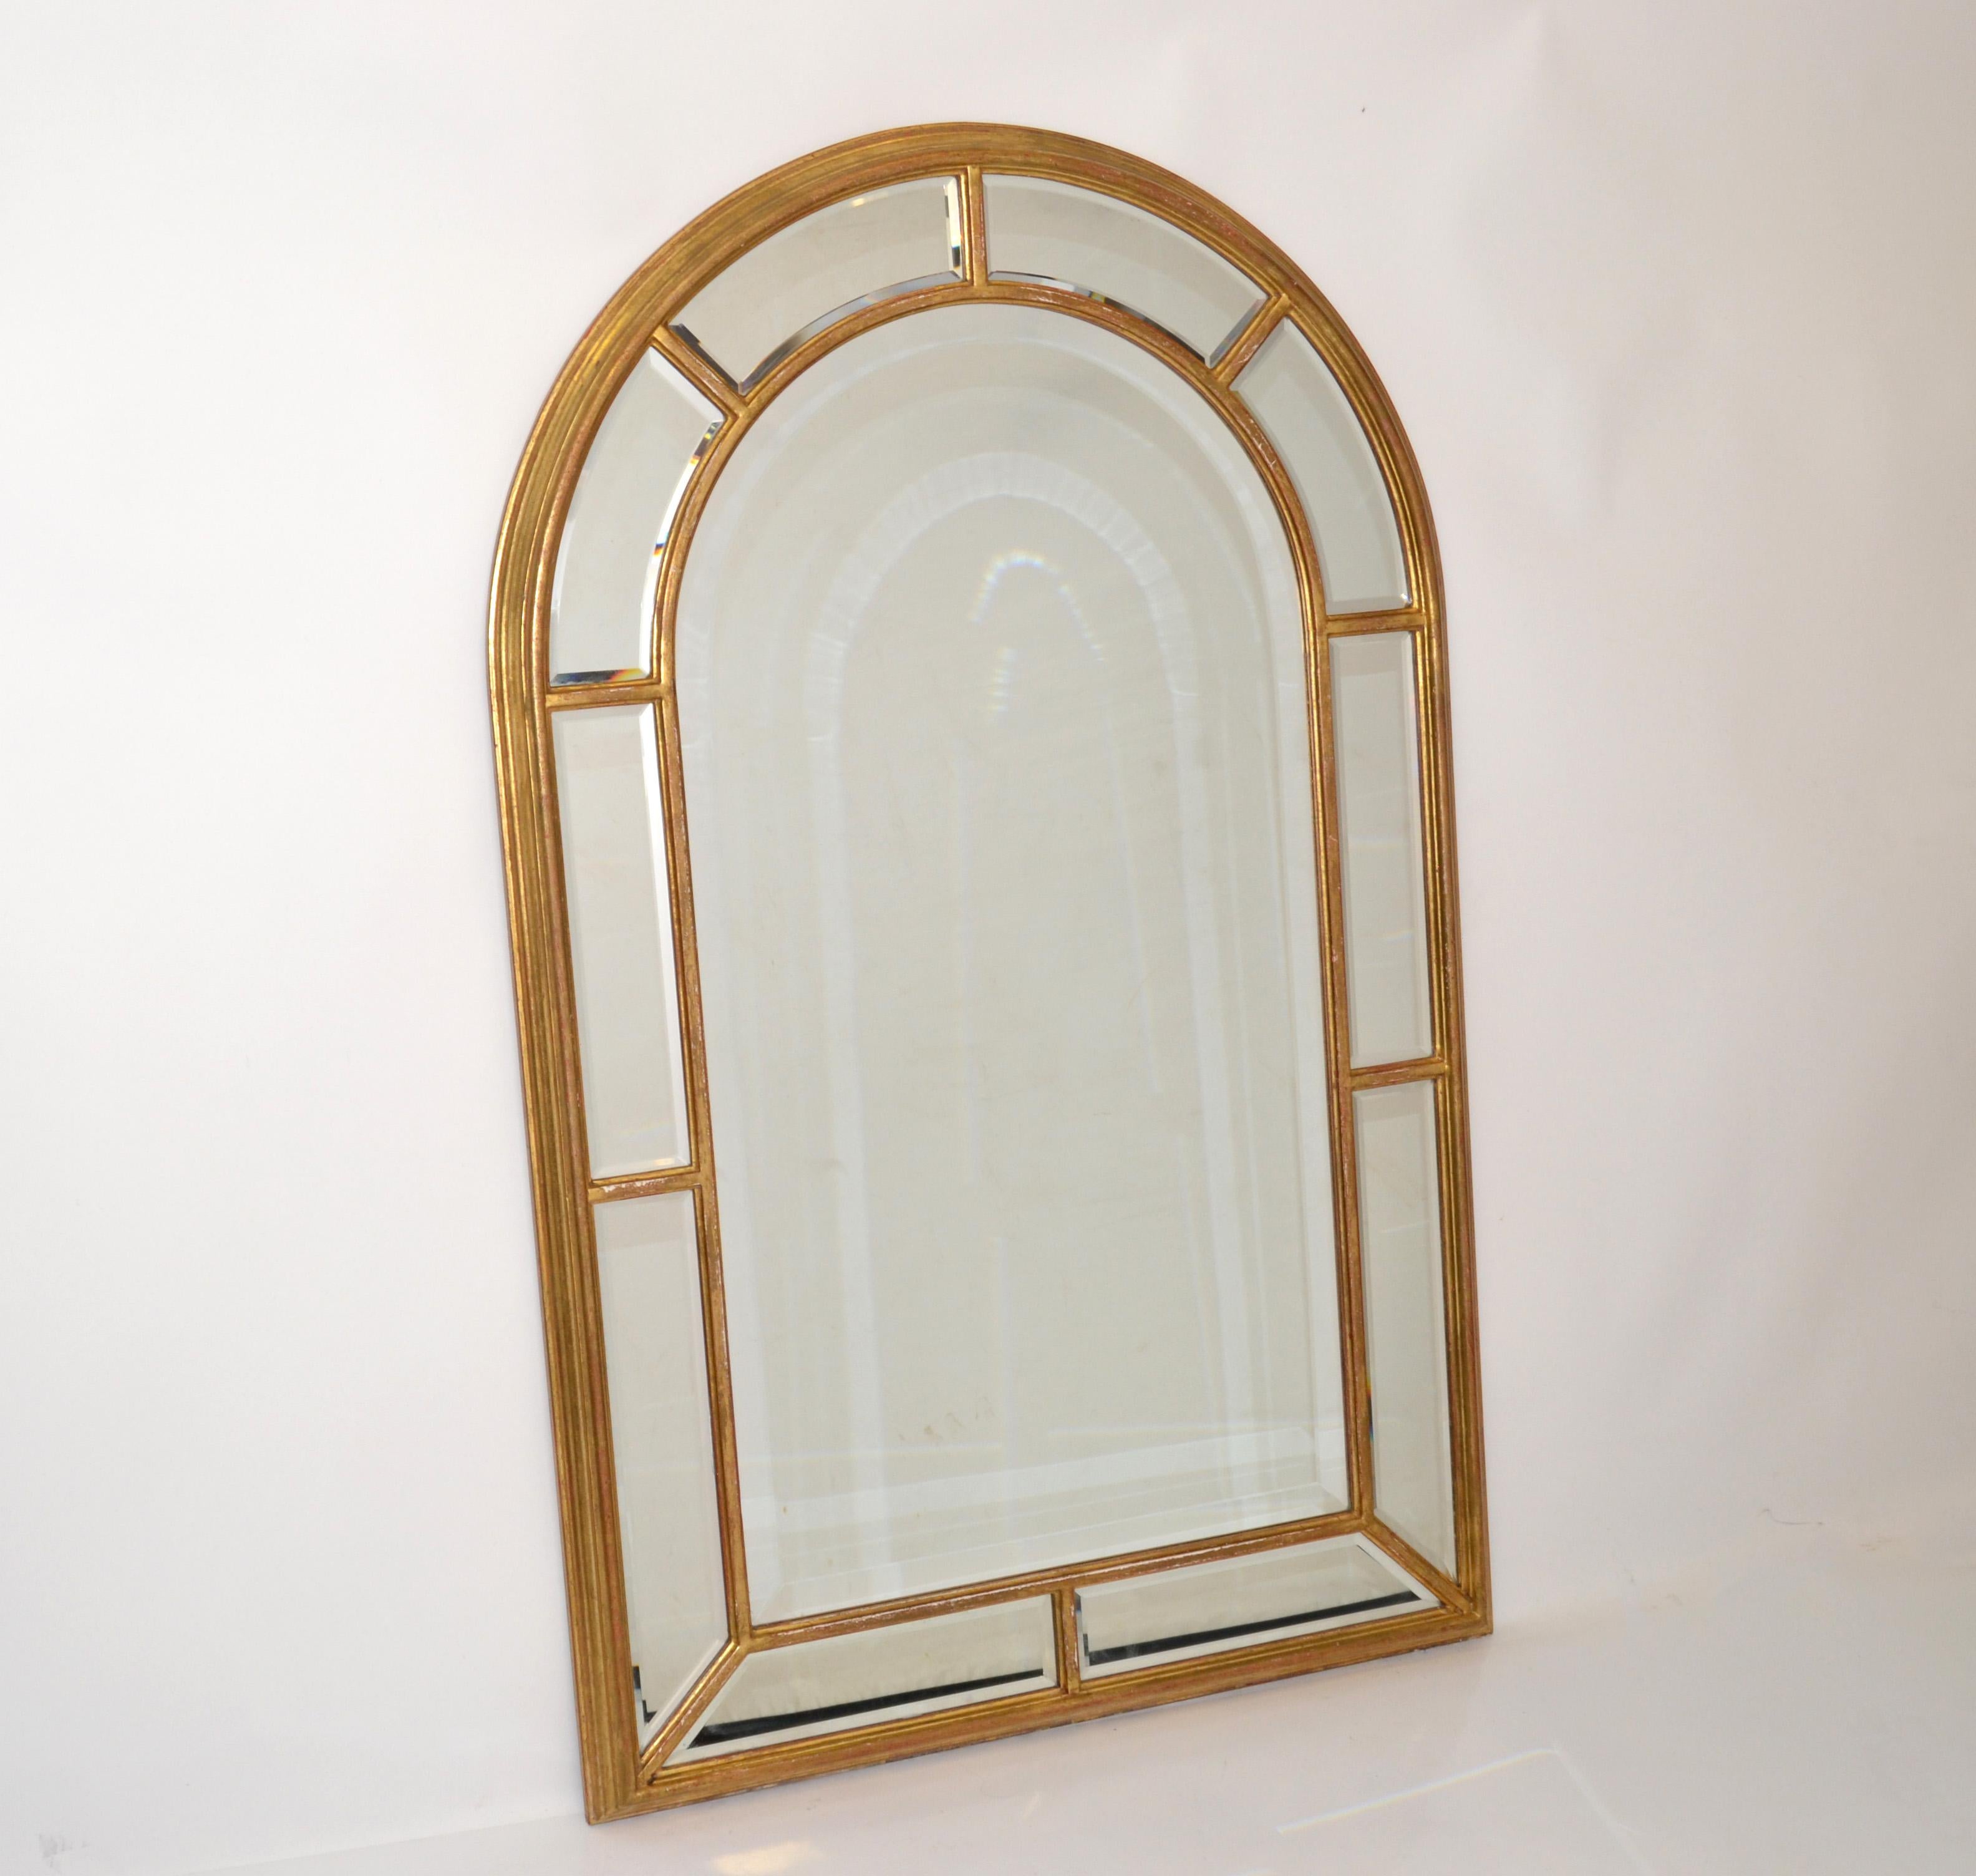 Hollywood Regency 1970s Arch Shaped Italian Firenze Beveled Glass Wall Mirror with Gilt Wood Frame For Sale